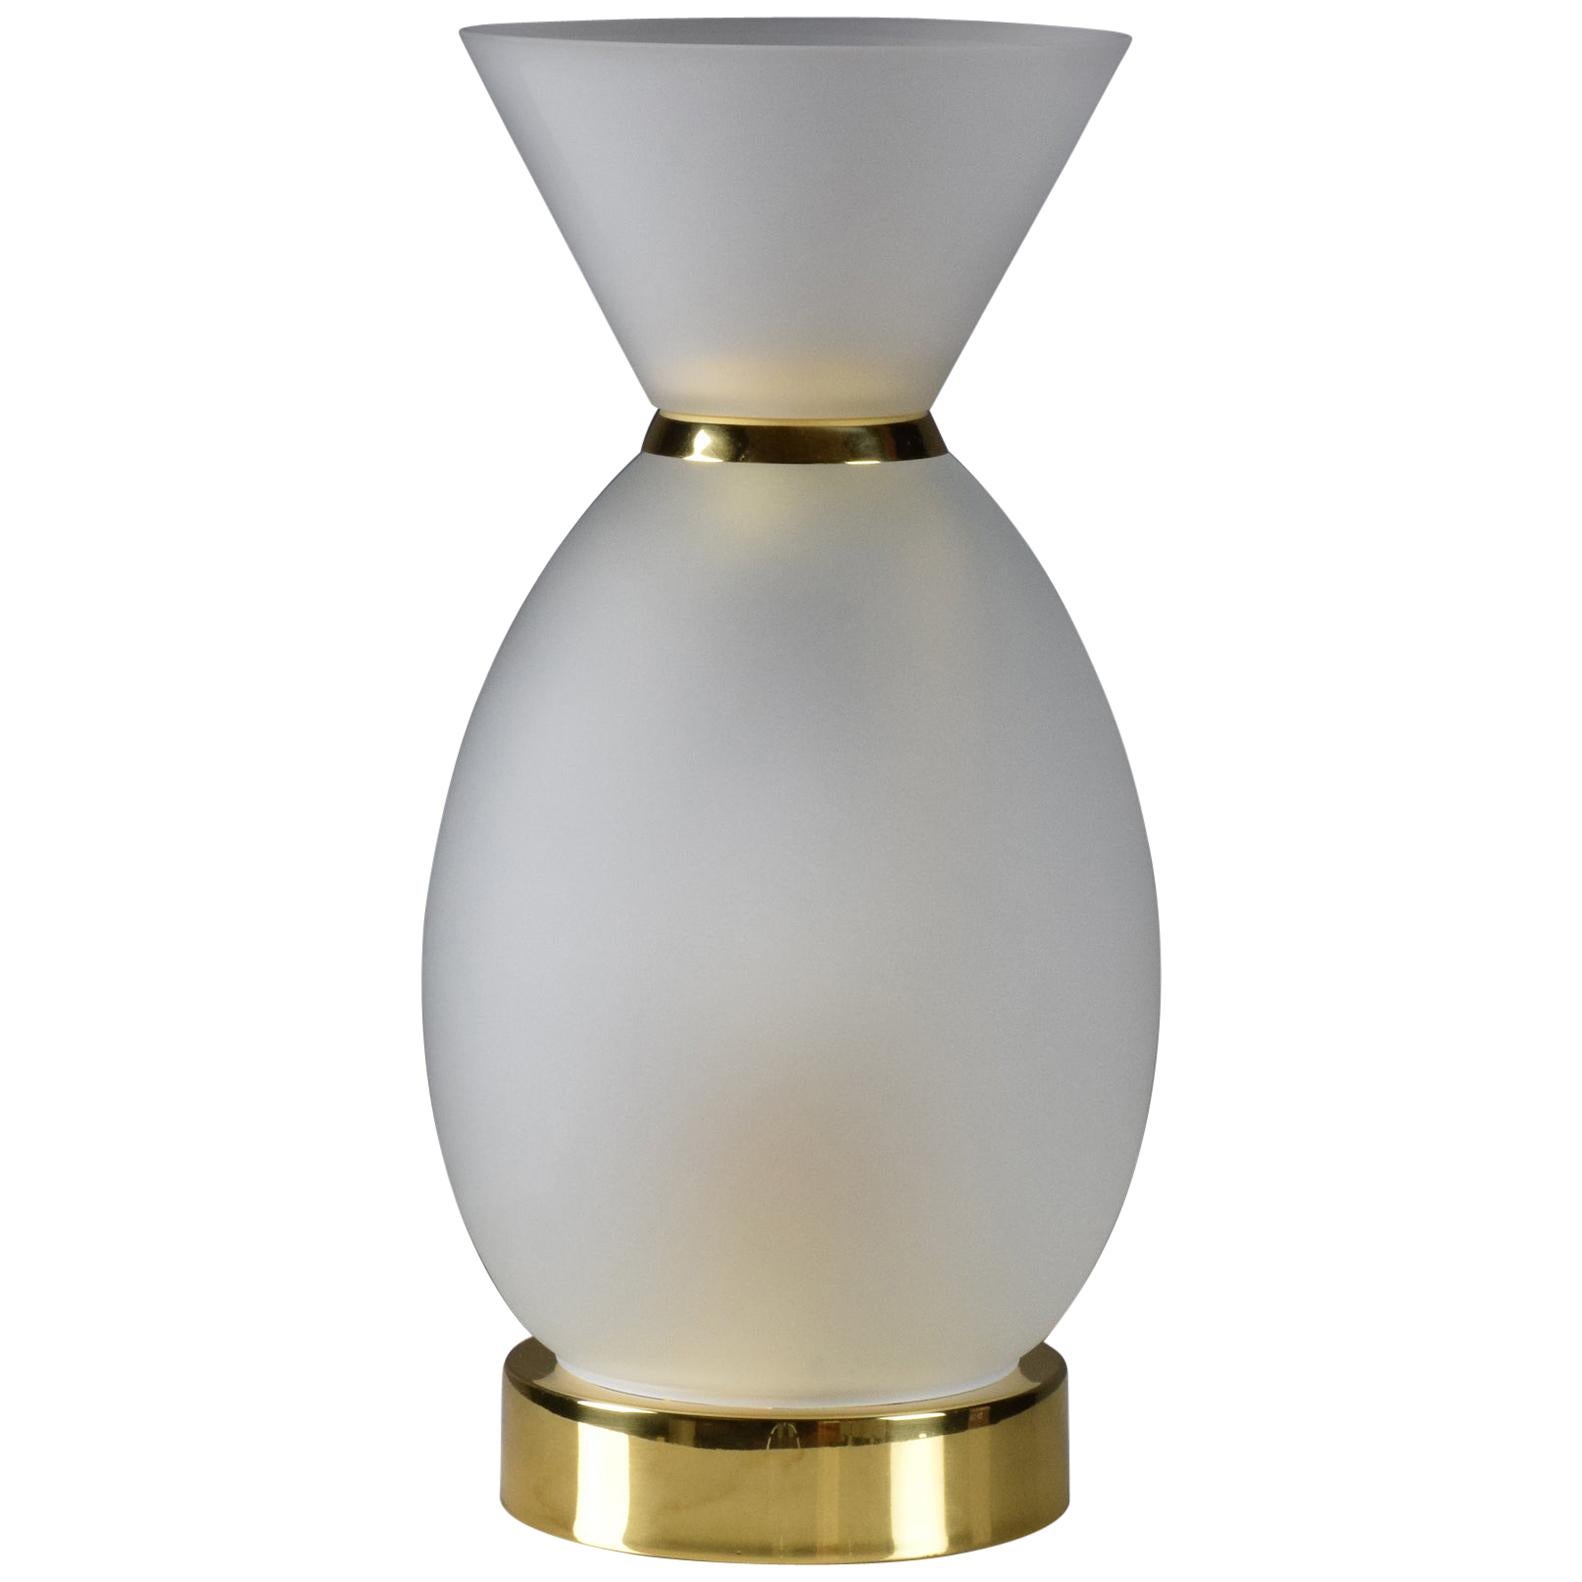 Zam-T1 Glass and Brass Table Lamp, Flow 2 Collection